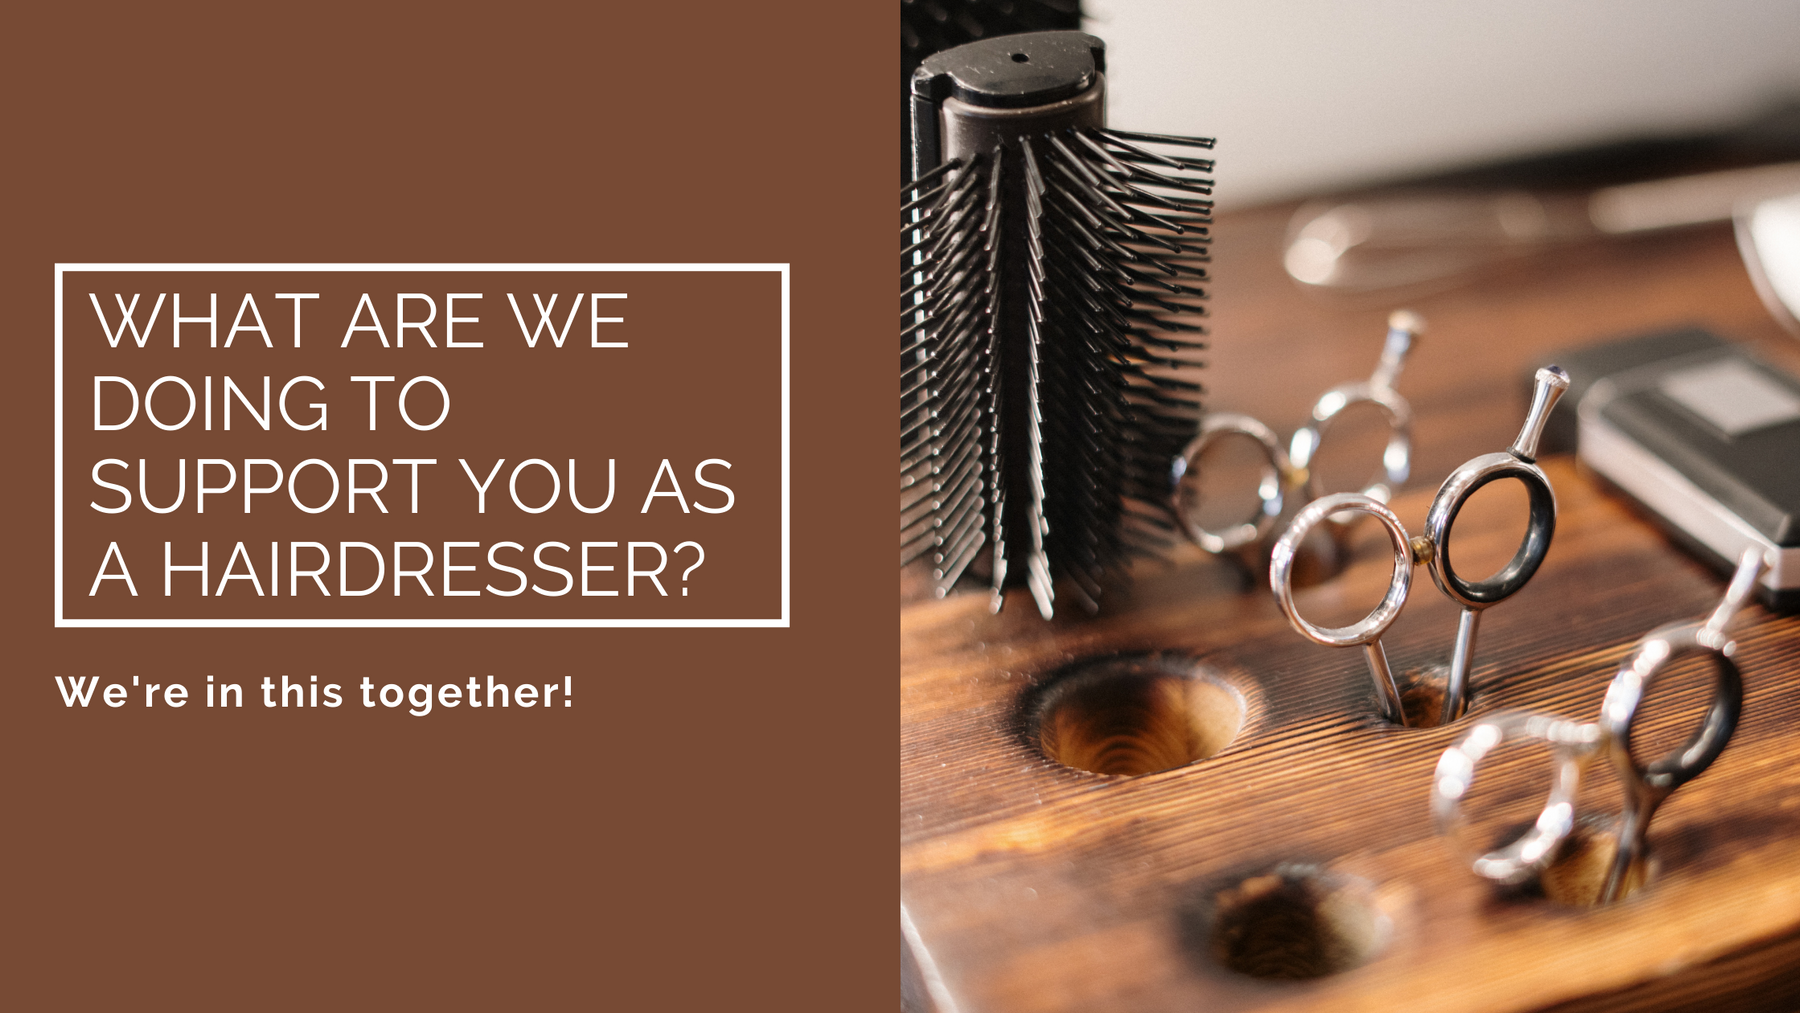 What are we doing to support you as a hairdresser?